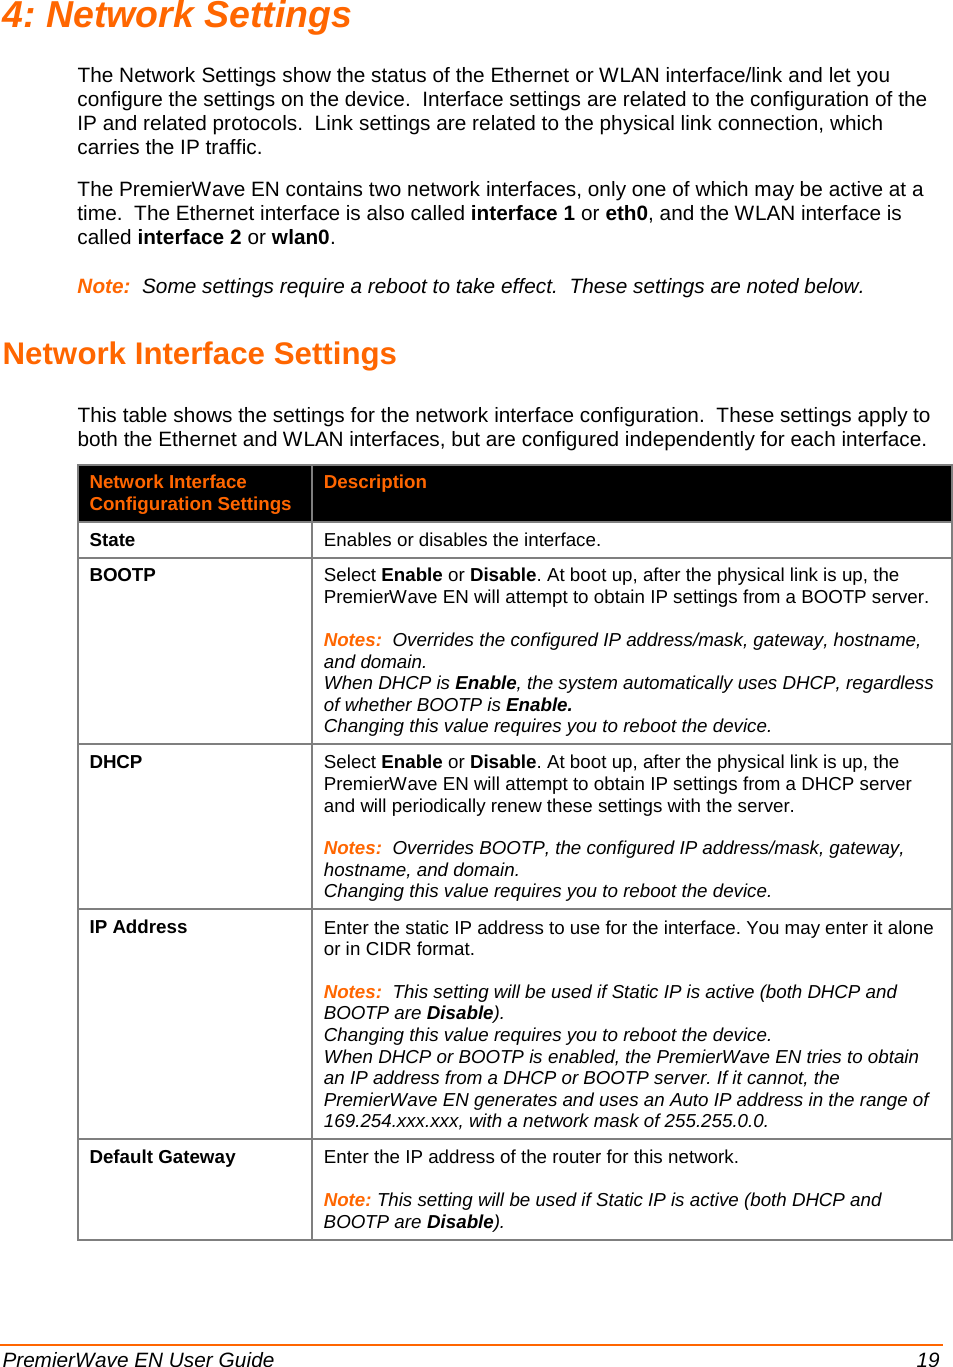  PremierWave EN User Guide    19 4: Network Settings The Network Settings show the status of the Ethernet or WLAN interface/link and let you configure the settings on the device.  Interface settings are related to the configuration of the IP and related protocols.  Link settings are related to the physical link connection, which carries the IP traffic. The PremierWave EN contains two network interfaces, only one of which may be active at a time.  The Ethernet interface is also called interface 1 or eth0, and the WLAN interface is called interface 2 or wlan0. Note:  Some settings require a reboot to take effect.  These settings are noted below. Network Interface Settings This table shows the settings for the network interface configuration.  These settings apply to both the Ethernet and WLAN interfaces, but are configured independently for each interface. Network Interface Configuration Settings Description State Enables or disables the interface. BOOTP Select Enable or Disable. At boot up, after the physical link is up, the PremierWave EN will attempt to obtain IP settings from a BOOTP server.  Notes:  Overrides the configured IP address/mask, gateway, hostname, and domain. When DHCP is Enable, the system automatically uses DHCP, regardless of whether BOOTP is Enable. Changing this value requires you to reboot the device. DHCP Select Enable or Disable. At boot up, after the physical link is up, the PremierWave EN will attempt to obtain IP settings from a DHCP server and will periodically renew these settings with the server.  Notes:  Overrides BOOTP, the configured IP address/mask, gateway, hostname, and domain. Changing this value requires you to reboot the device. IP Address Enter the static IP address to use for the interface. You may enter it alone or in CIDR format.  Notes:  This setting will be used if Static IP is active (both DHCP and BOOTP are Disable). Changing this value requires you to reboot the device. When DHCP or BOOTP is enabled, the PremierWave EN tries to obtain an IP address from a DHCP or BOOTP server. If it cannot, the PremierWave EN generates and uses an Auto IP address in the range of 169.254.xxx.xxx, with a network mask of 255.255.0.0. Default Gateway Enter the IP address of the router for this network.  Note: This setting will be used if Static IP is active (both DHCP and BOOTP are Disable). 